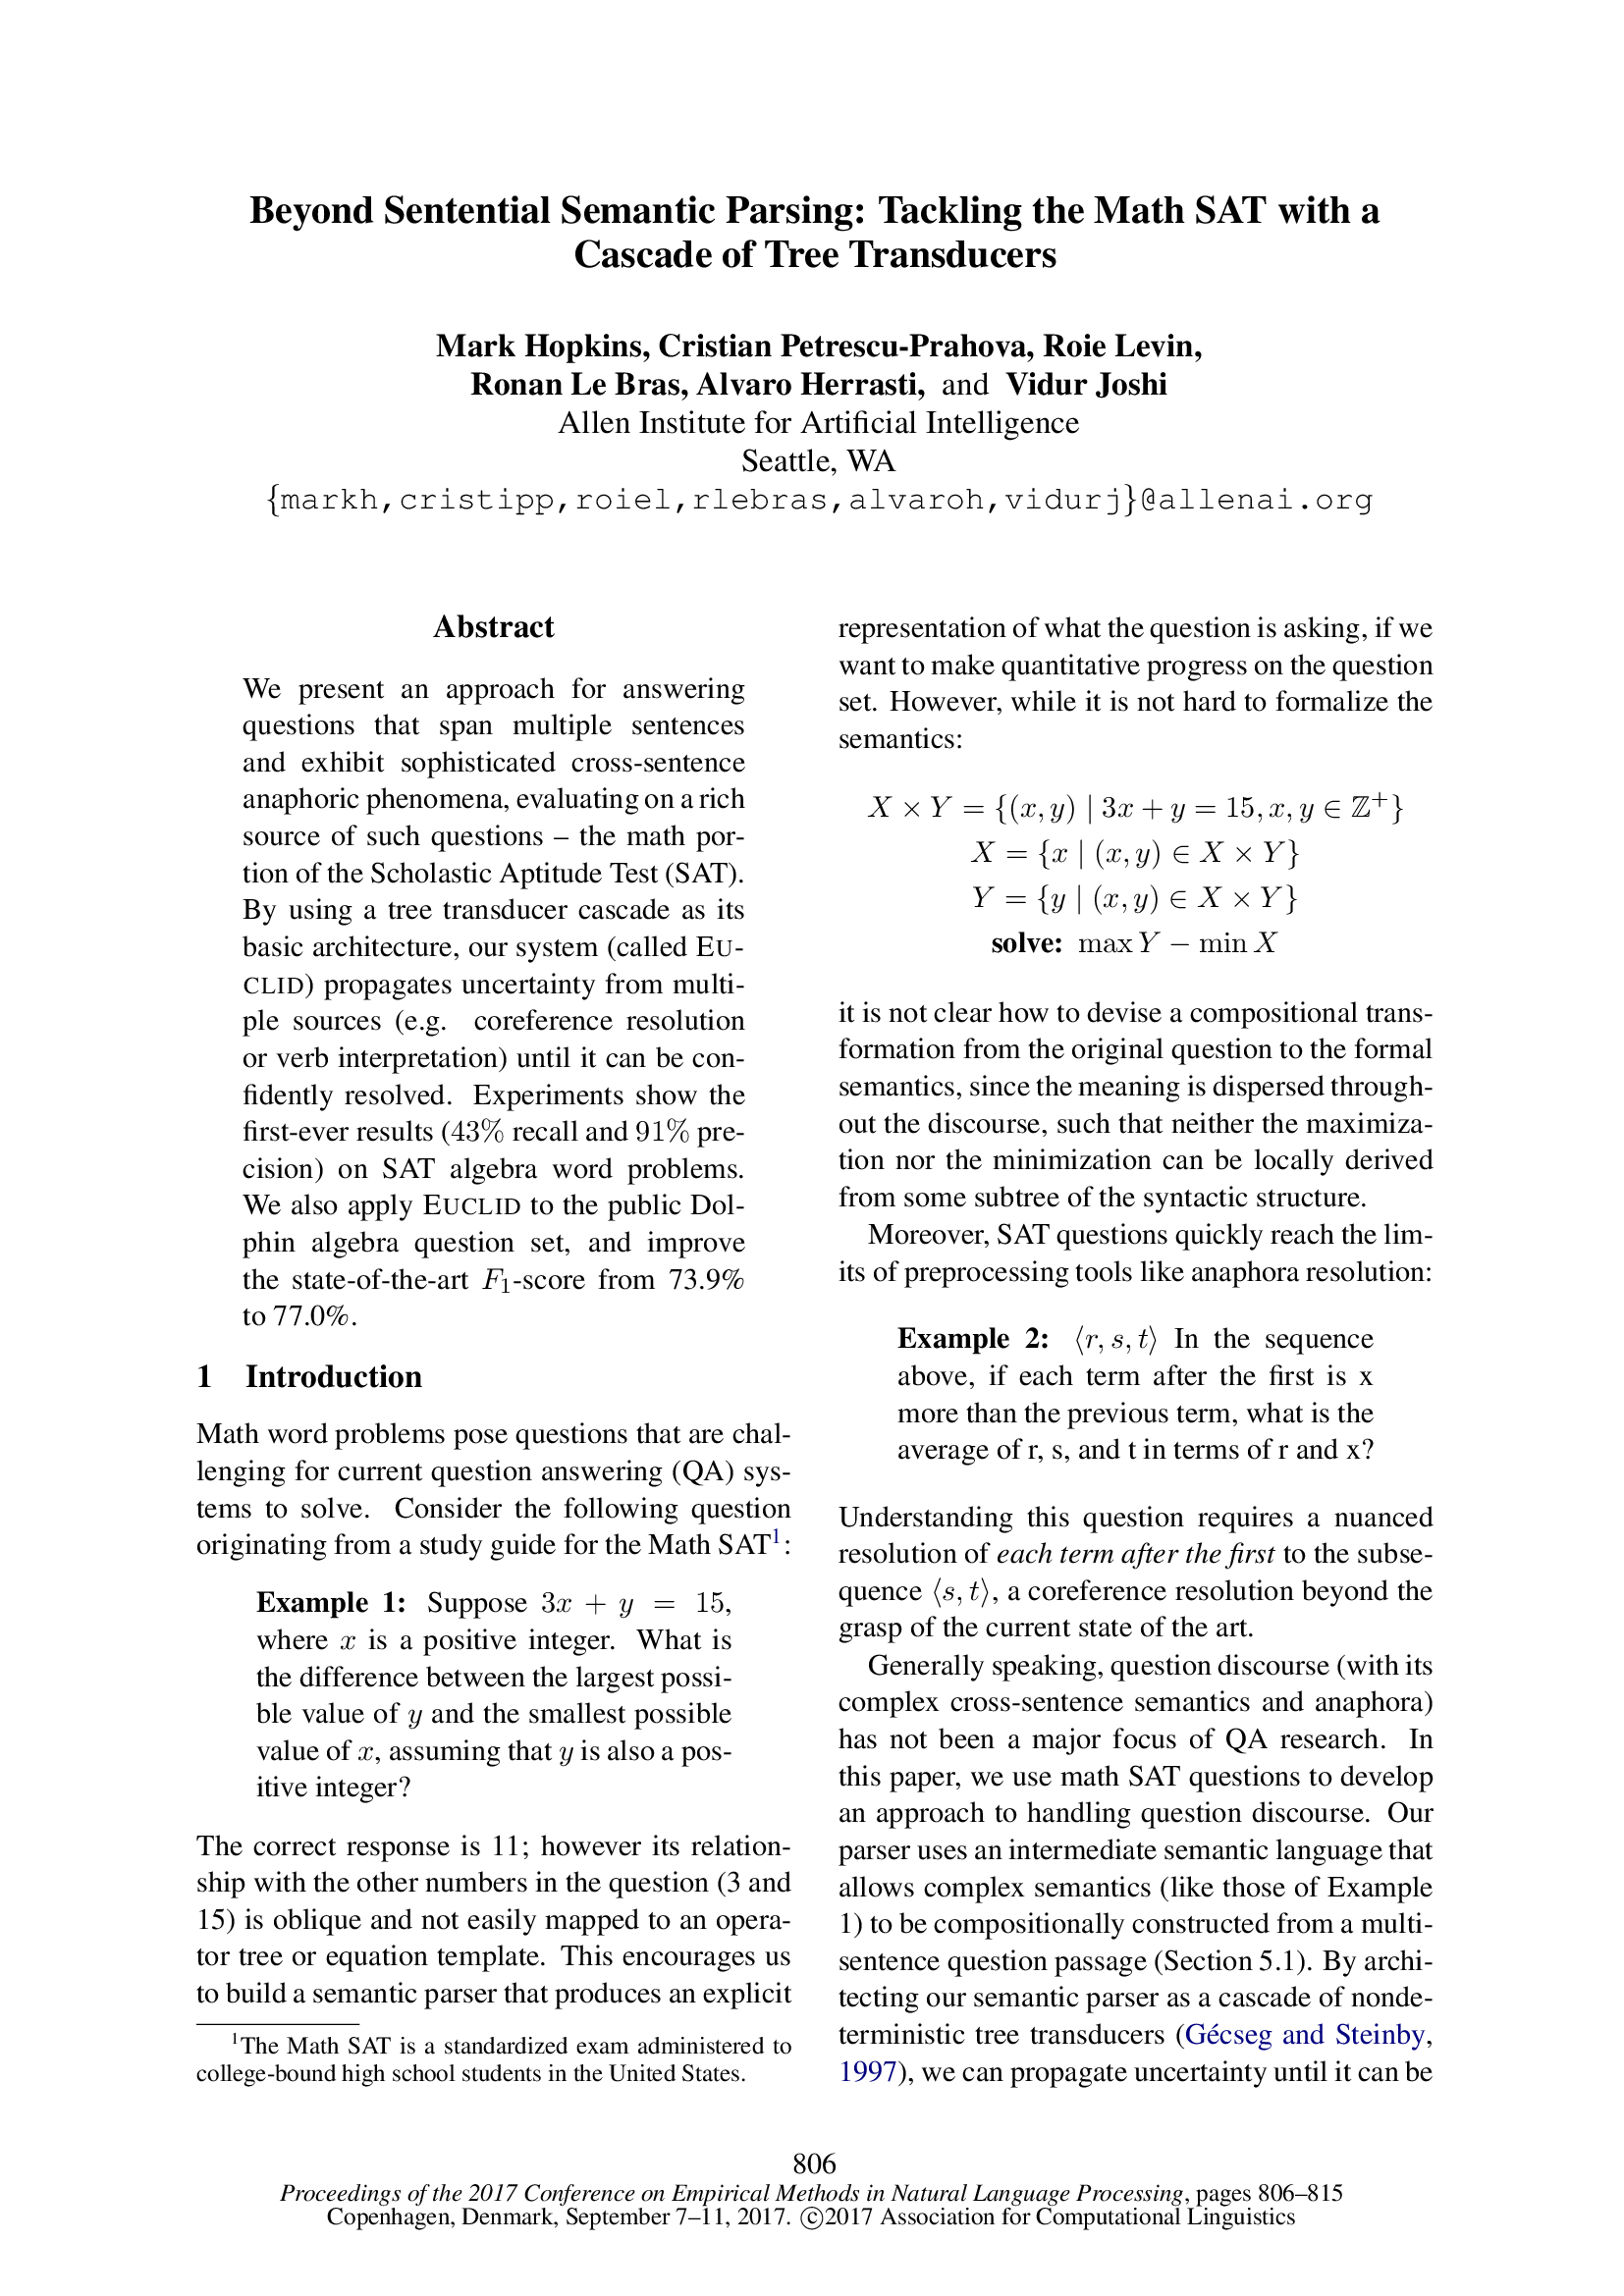 Beyond Sentential Semantic Parsing: Tackling the Math SAT with a Cascade of Tree Transducers